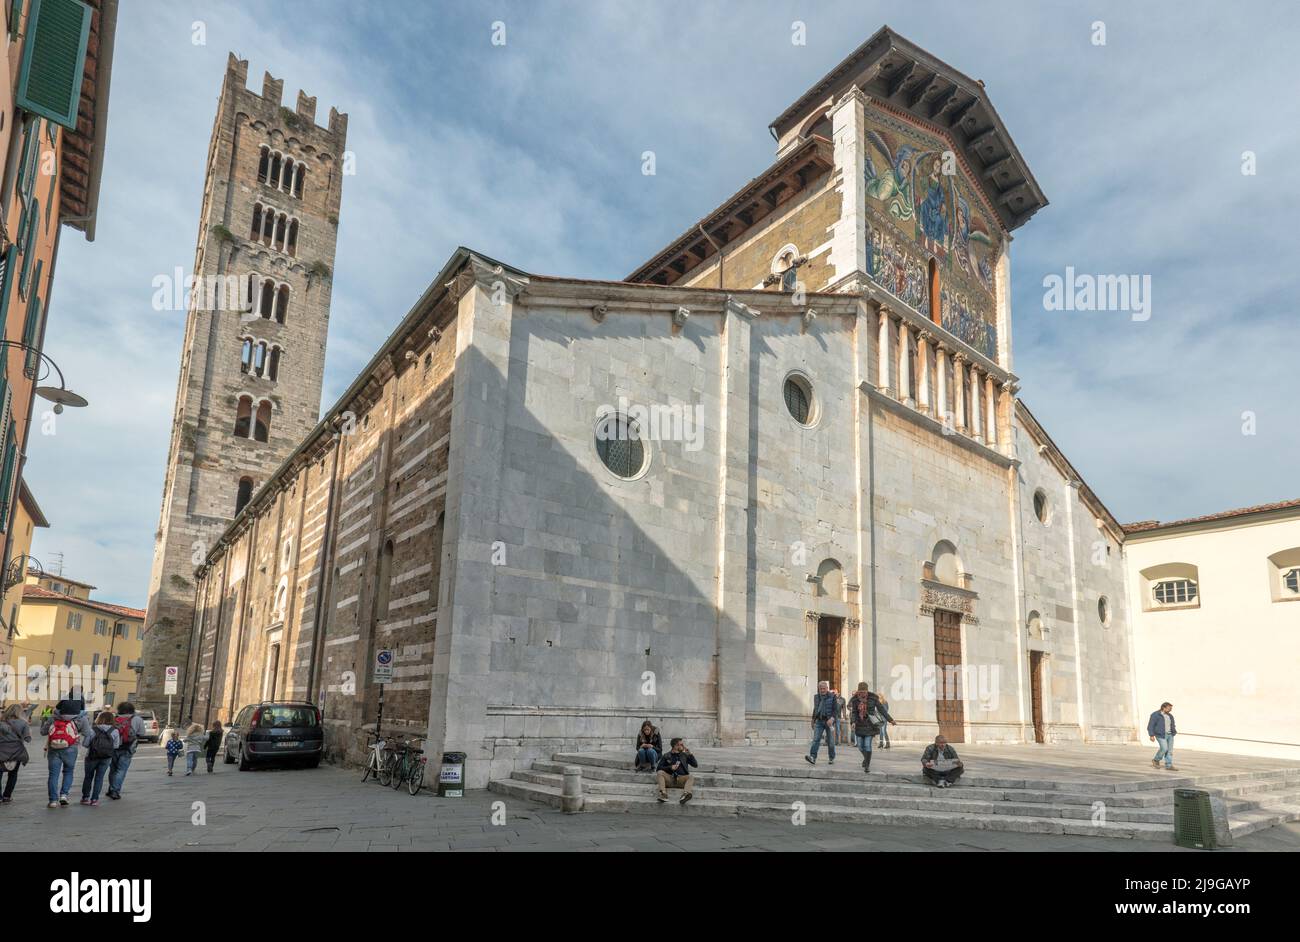 Basilica di San Frediano, Piazza San Frediano, Lucca. 12th century Romanesque style church with golden mosaic by Berlinghiero Berlinghieri on facade. Stock Photo